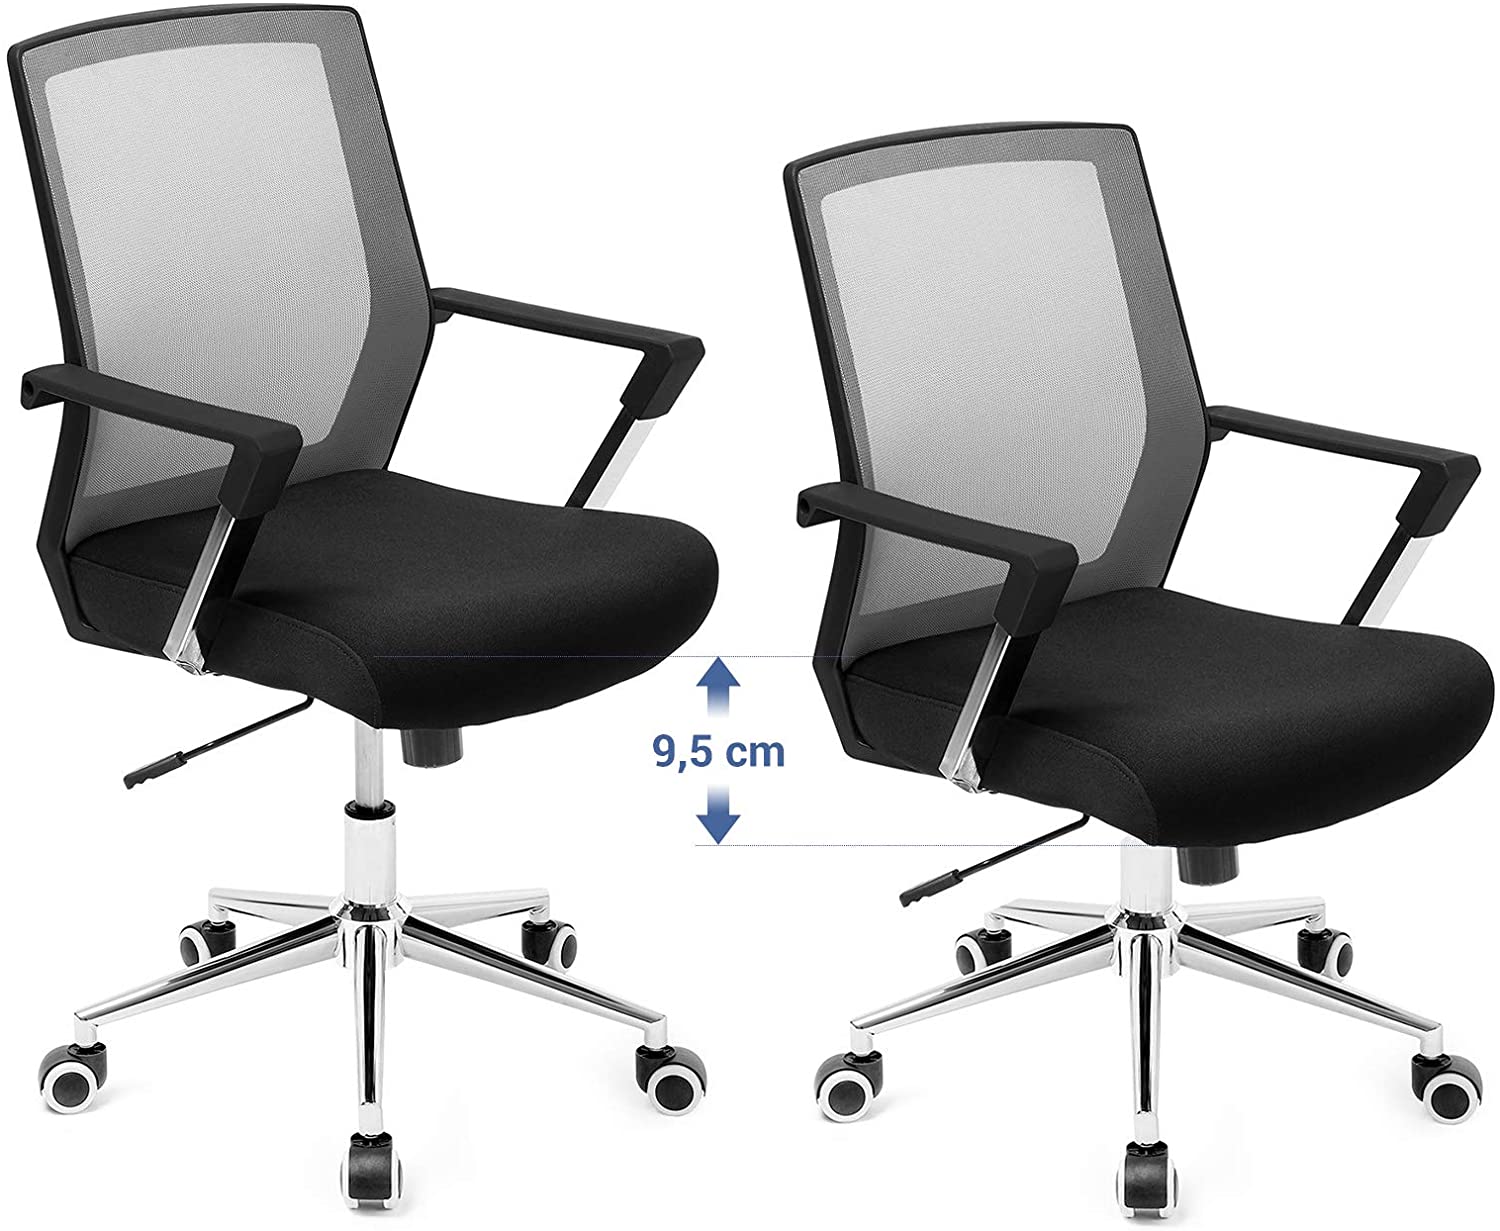 Office Swivel Chair, Mesh Desk Chair, with Chrome-Plated Steel Frame, Height Adjustable, with Tilt Function, Maks. Load Capacity: 150 kg, Grey and Black OBN83GY RAW58.dk 